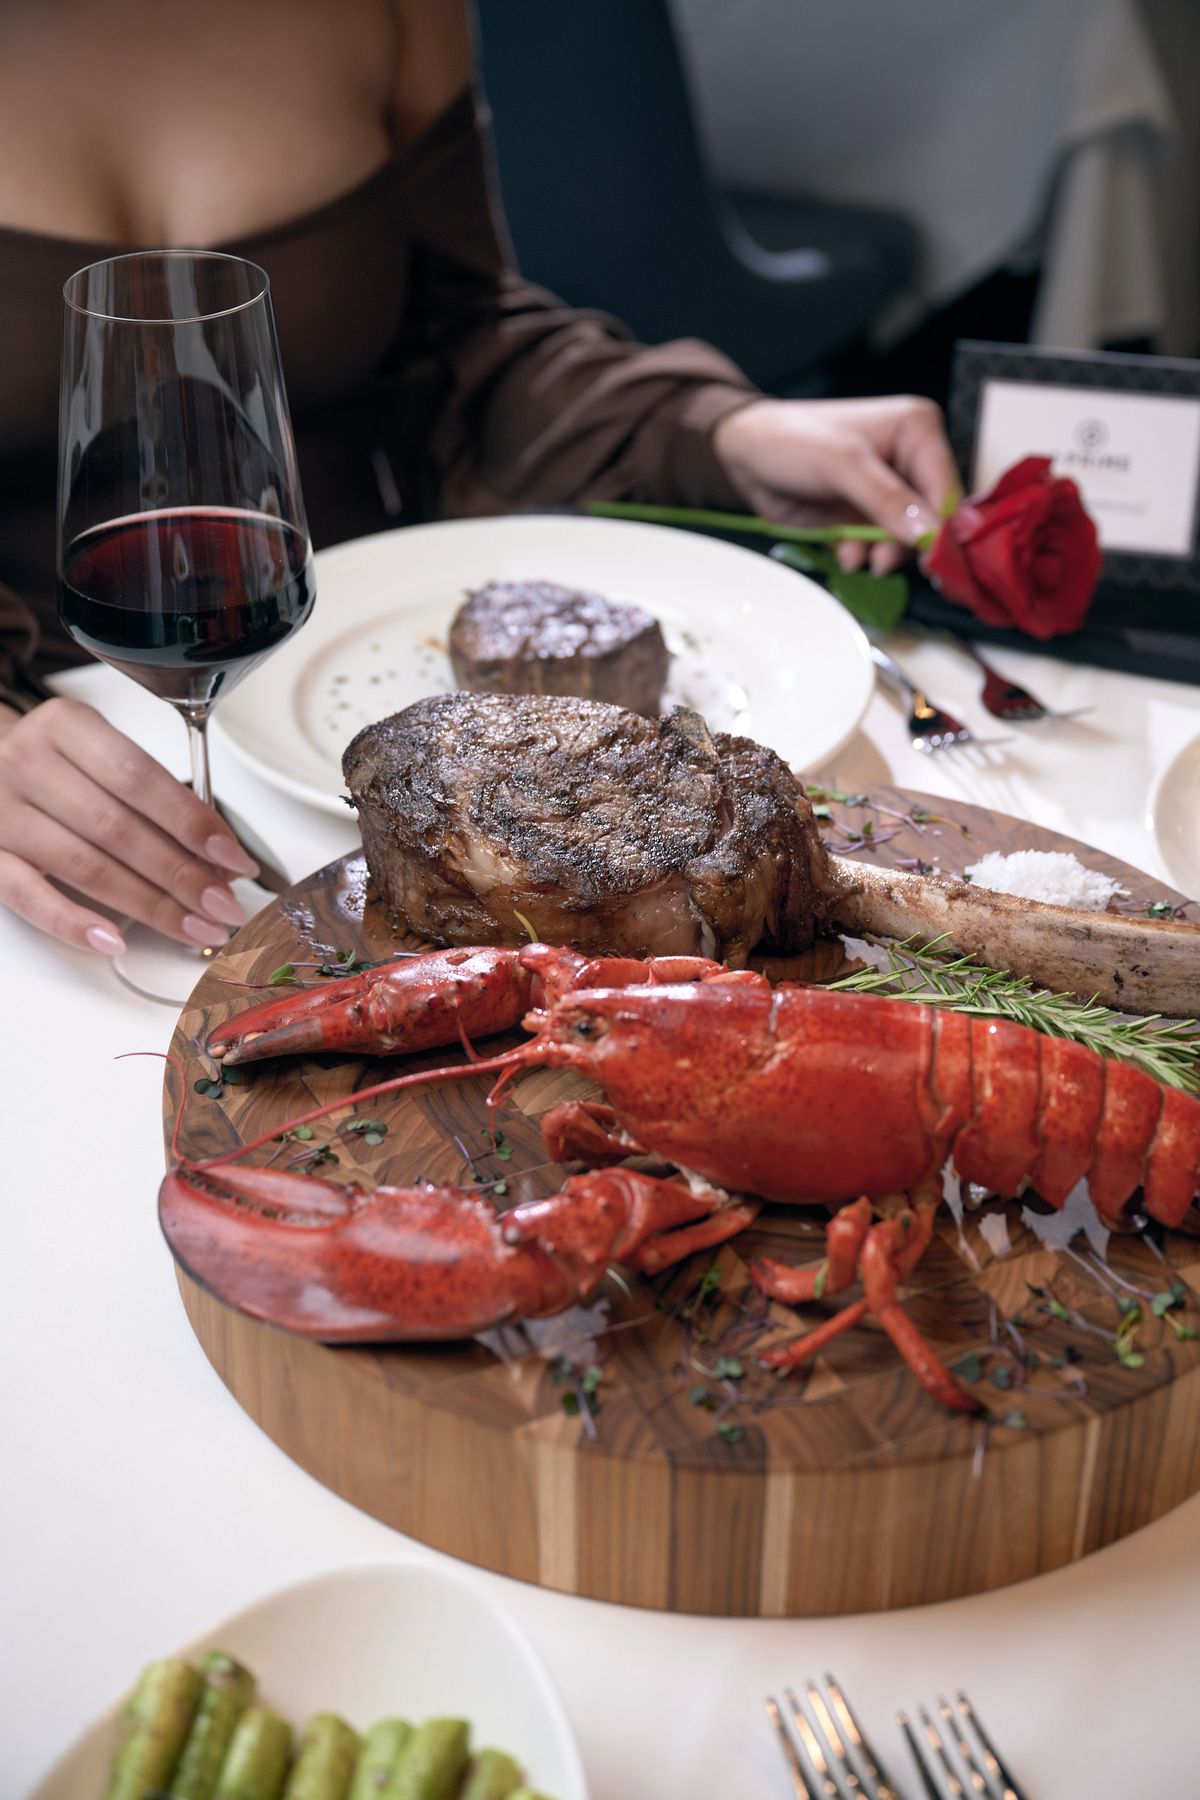 A round wooden plate of steak and lobster.